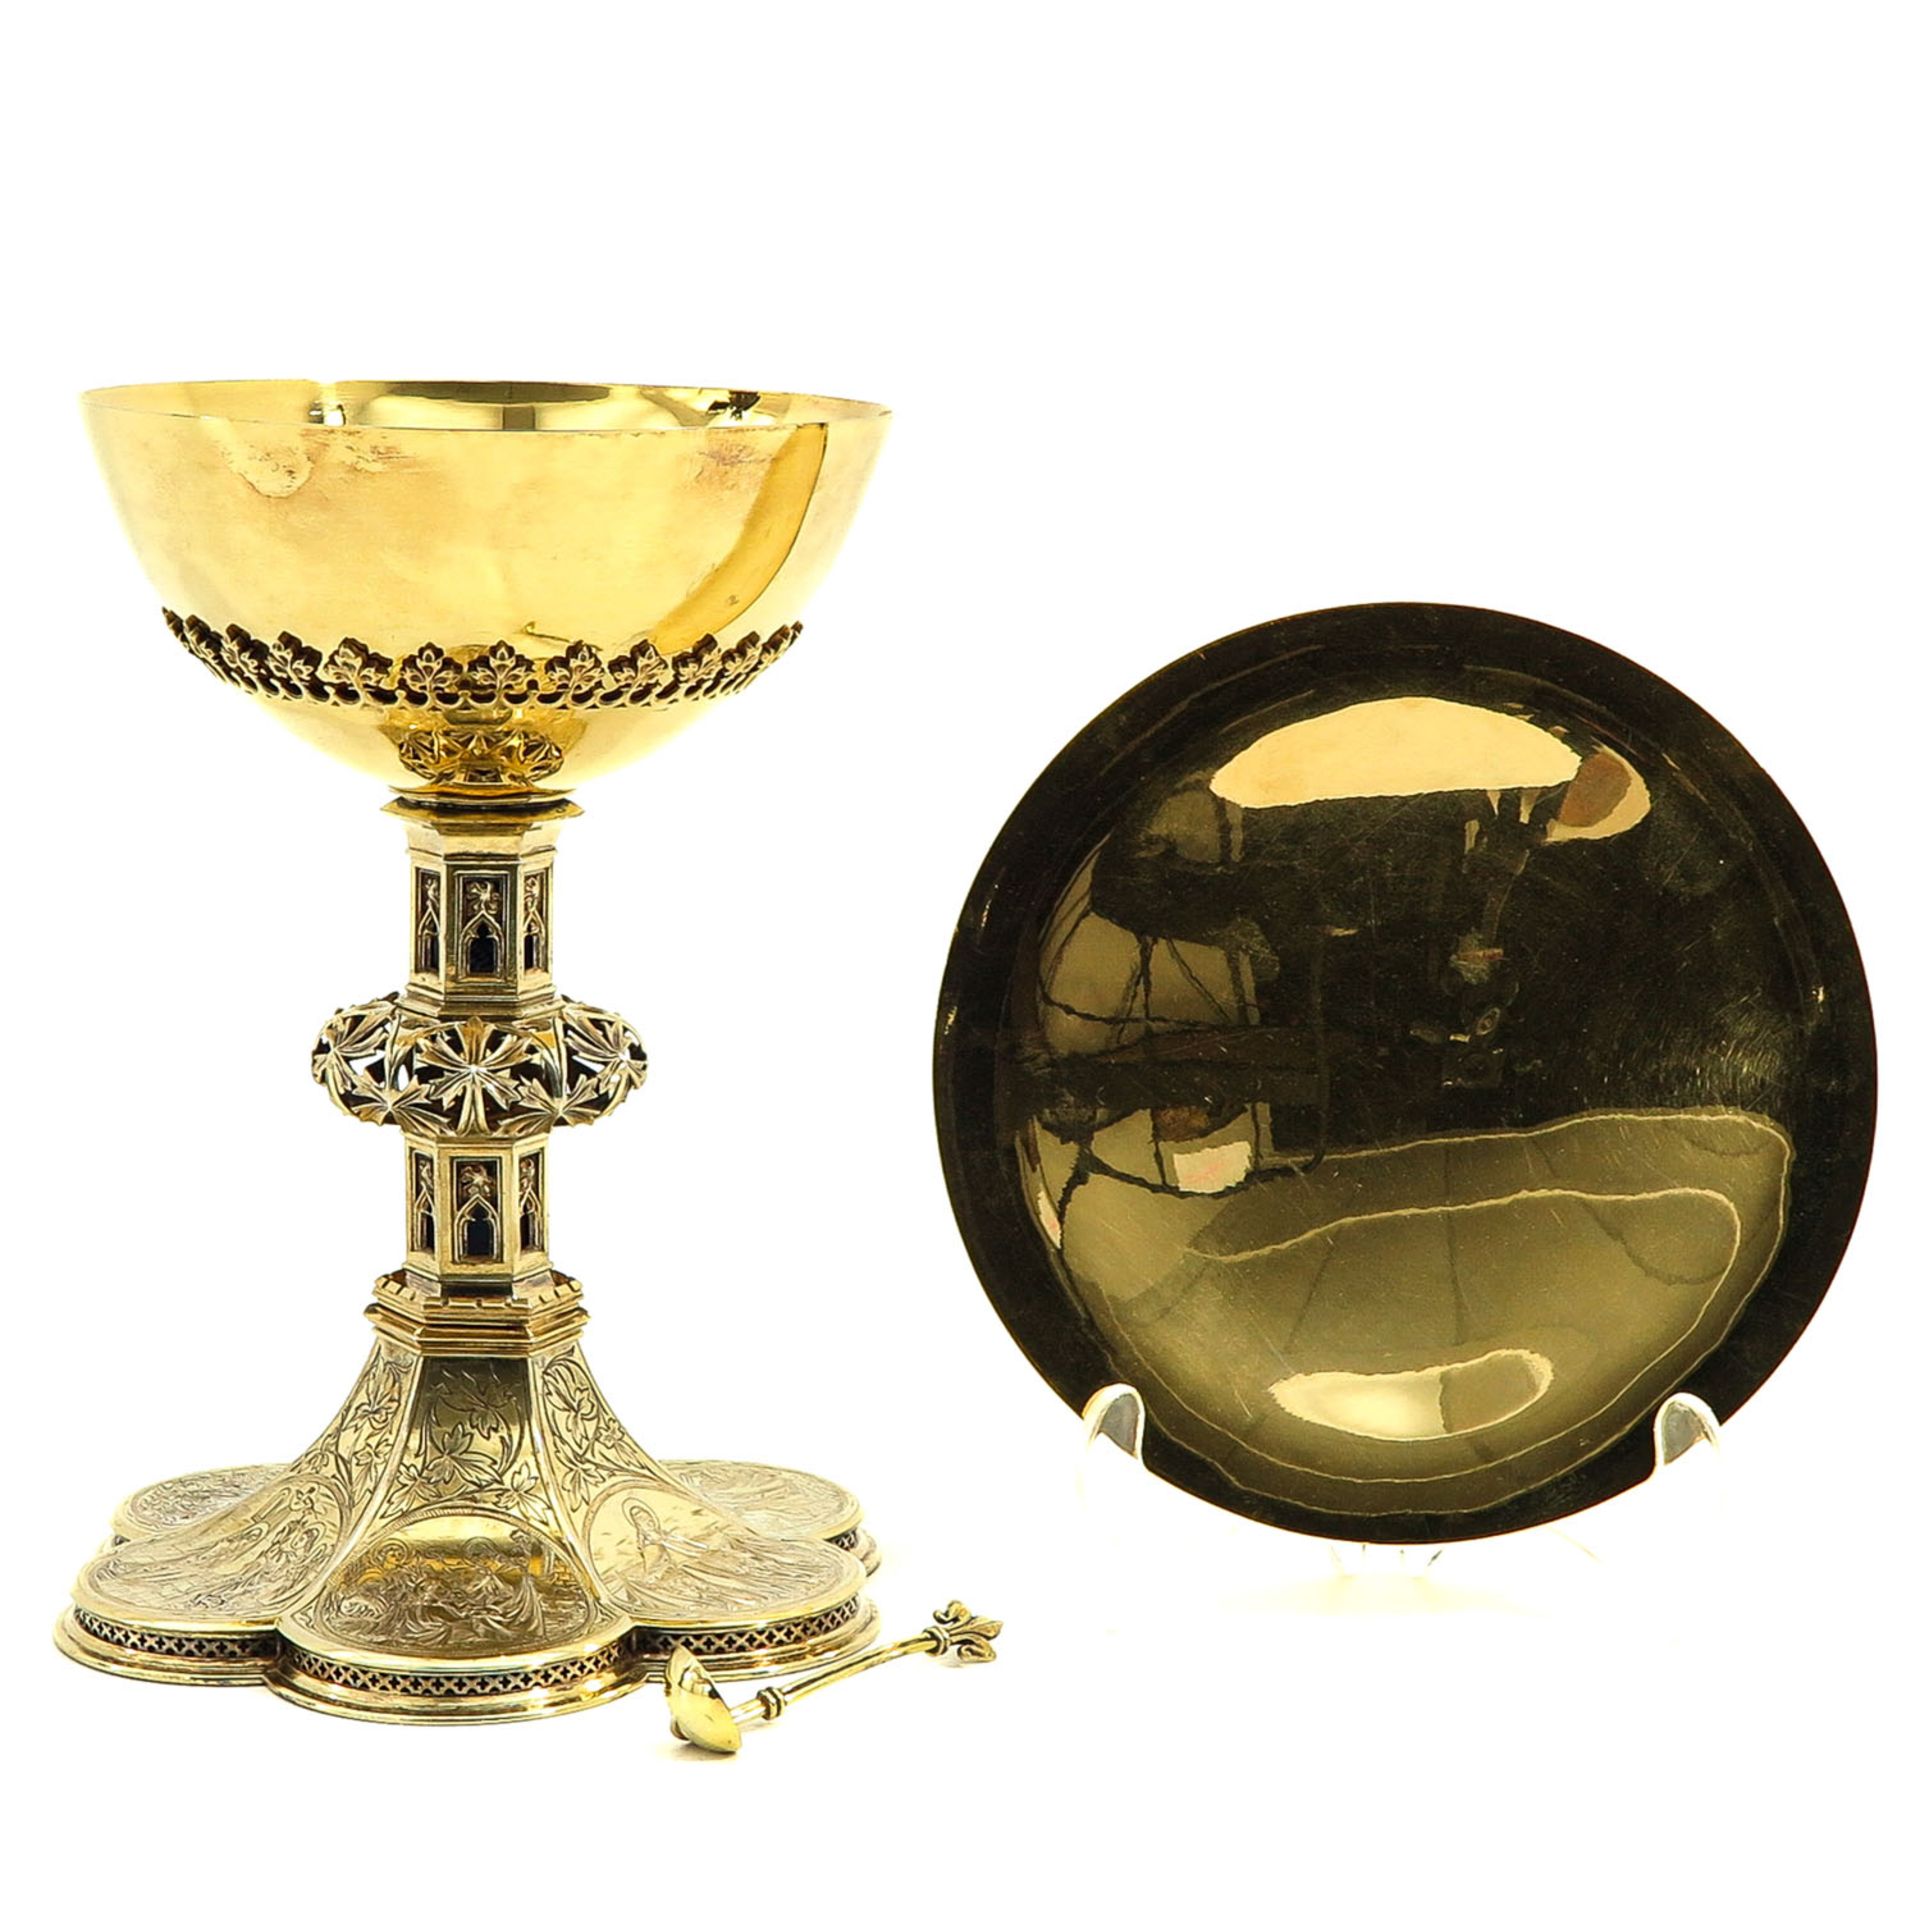 A Silver Vermeil Neo-Gothic Chalice